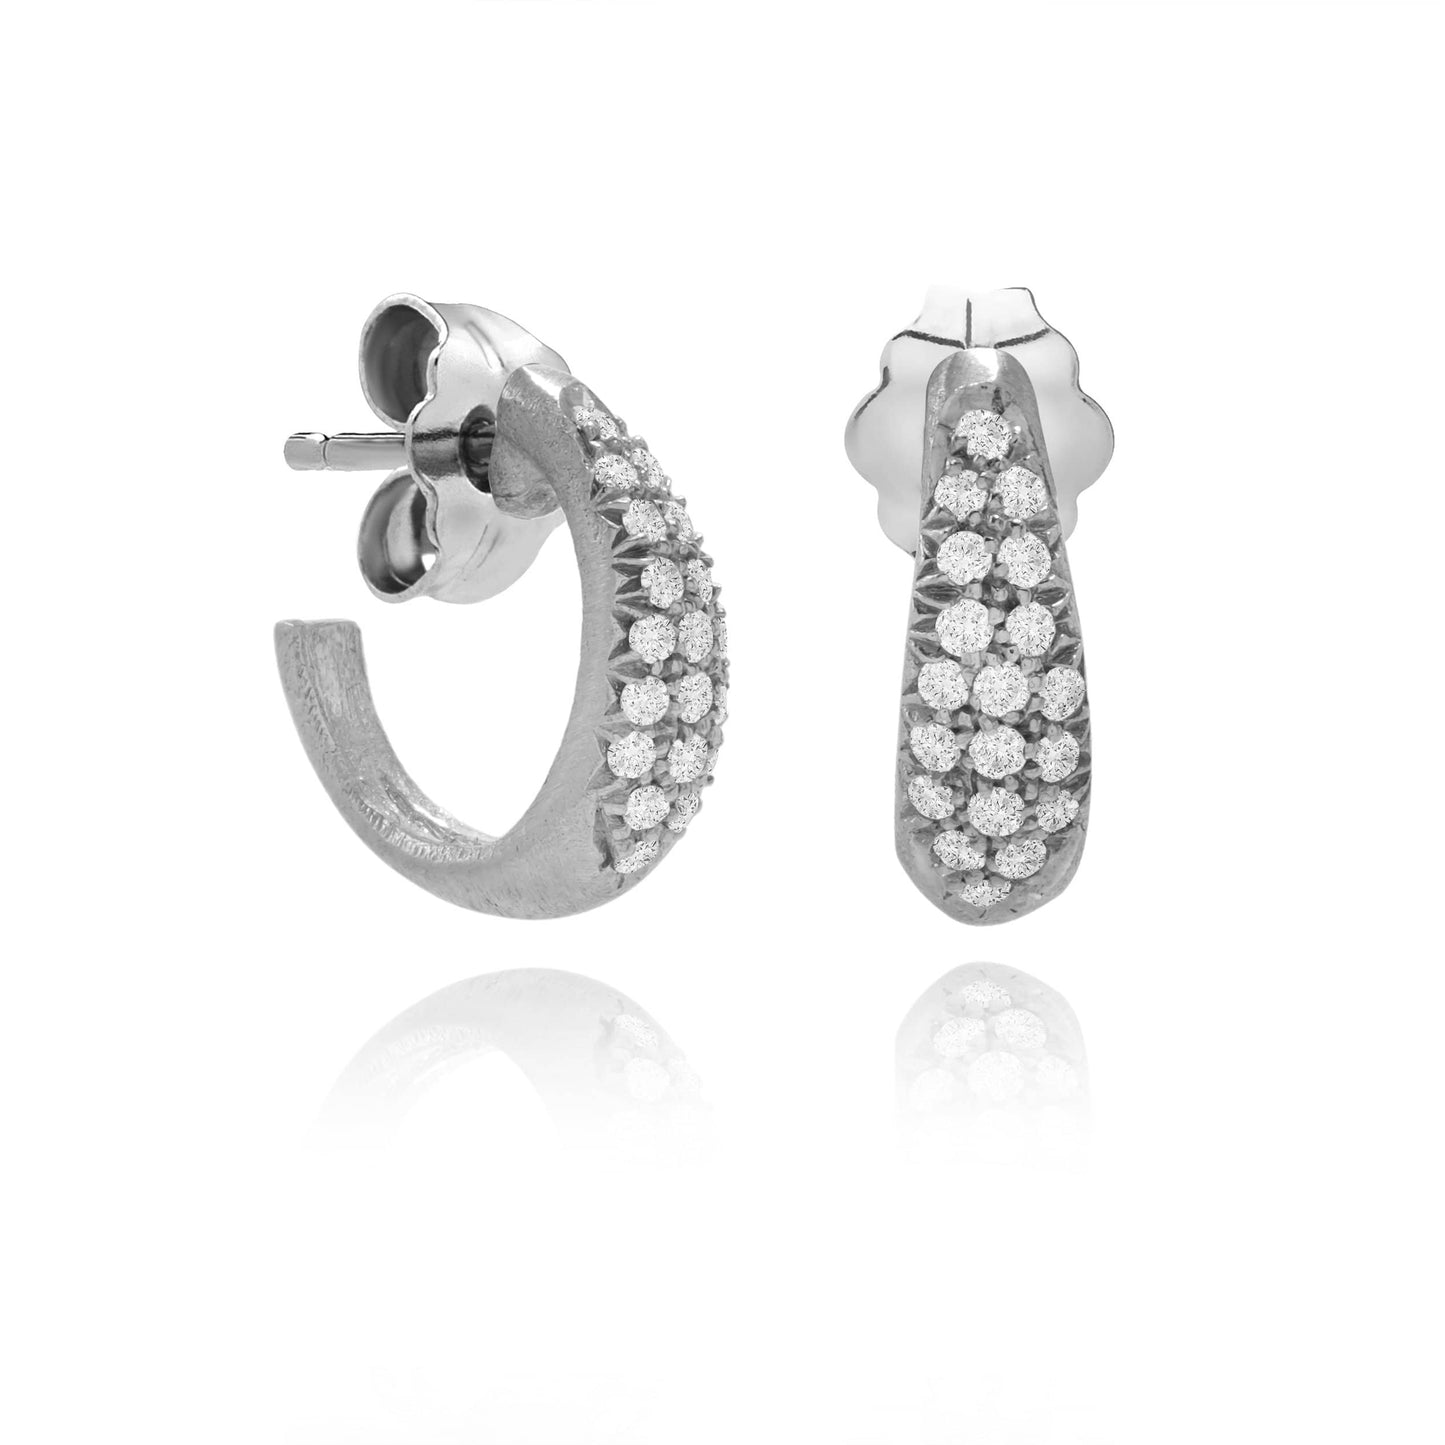 Dalia T Online Earrings Textured Gold Signature Collection 14KT White Gold 10mm Pave Diamond Hoop Earrings